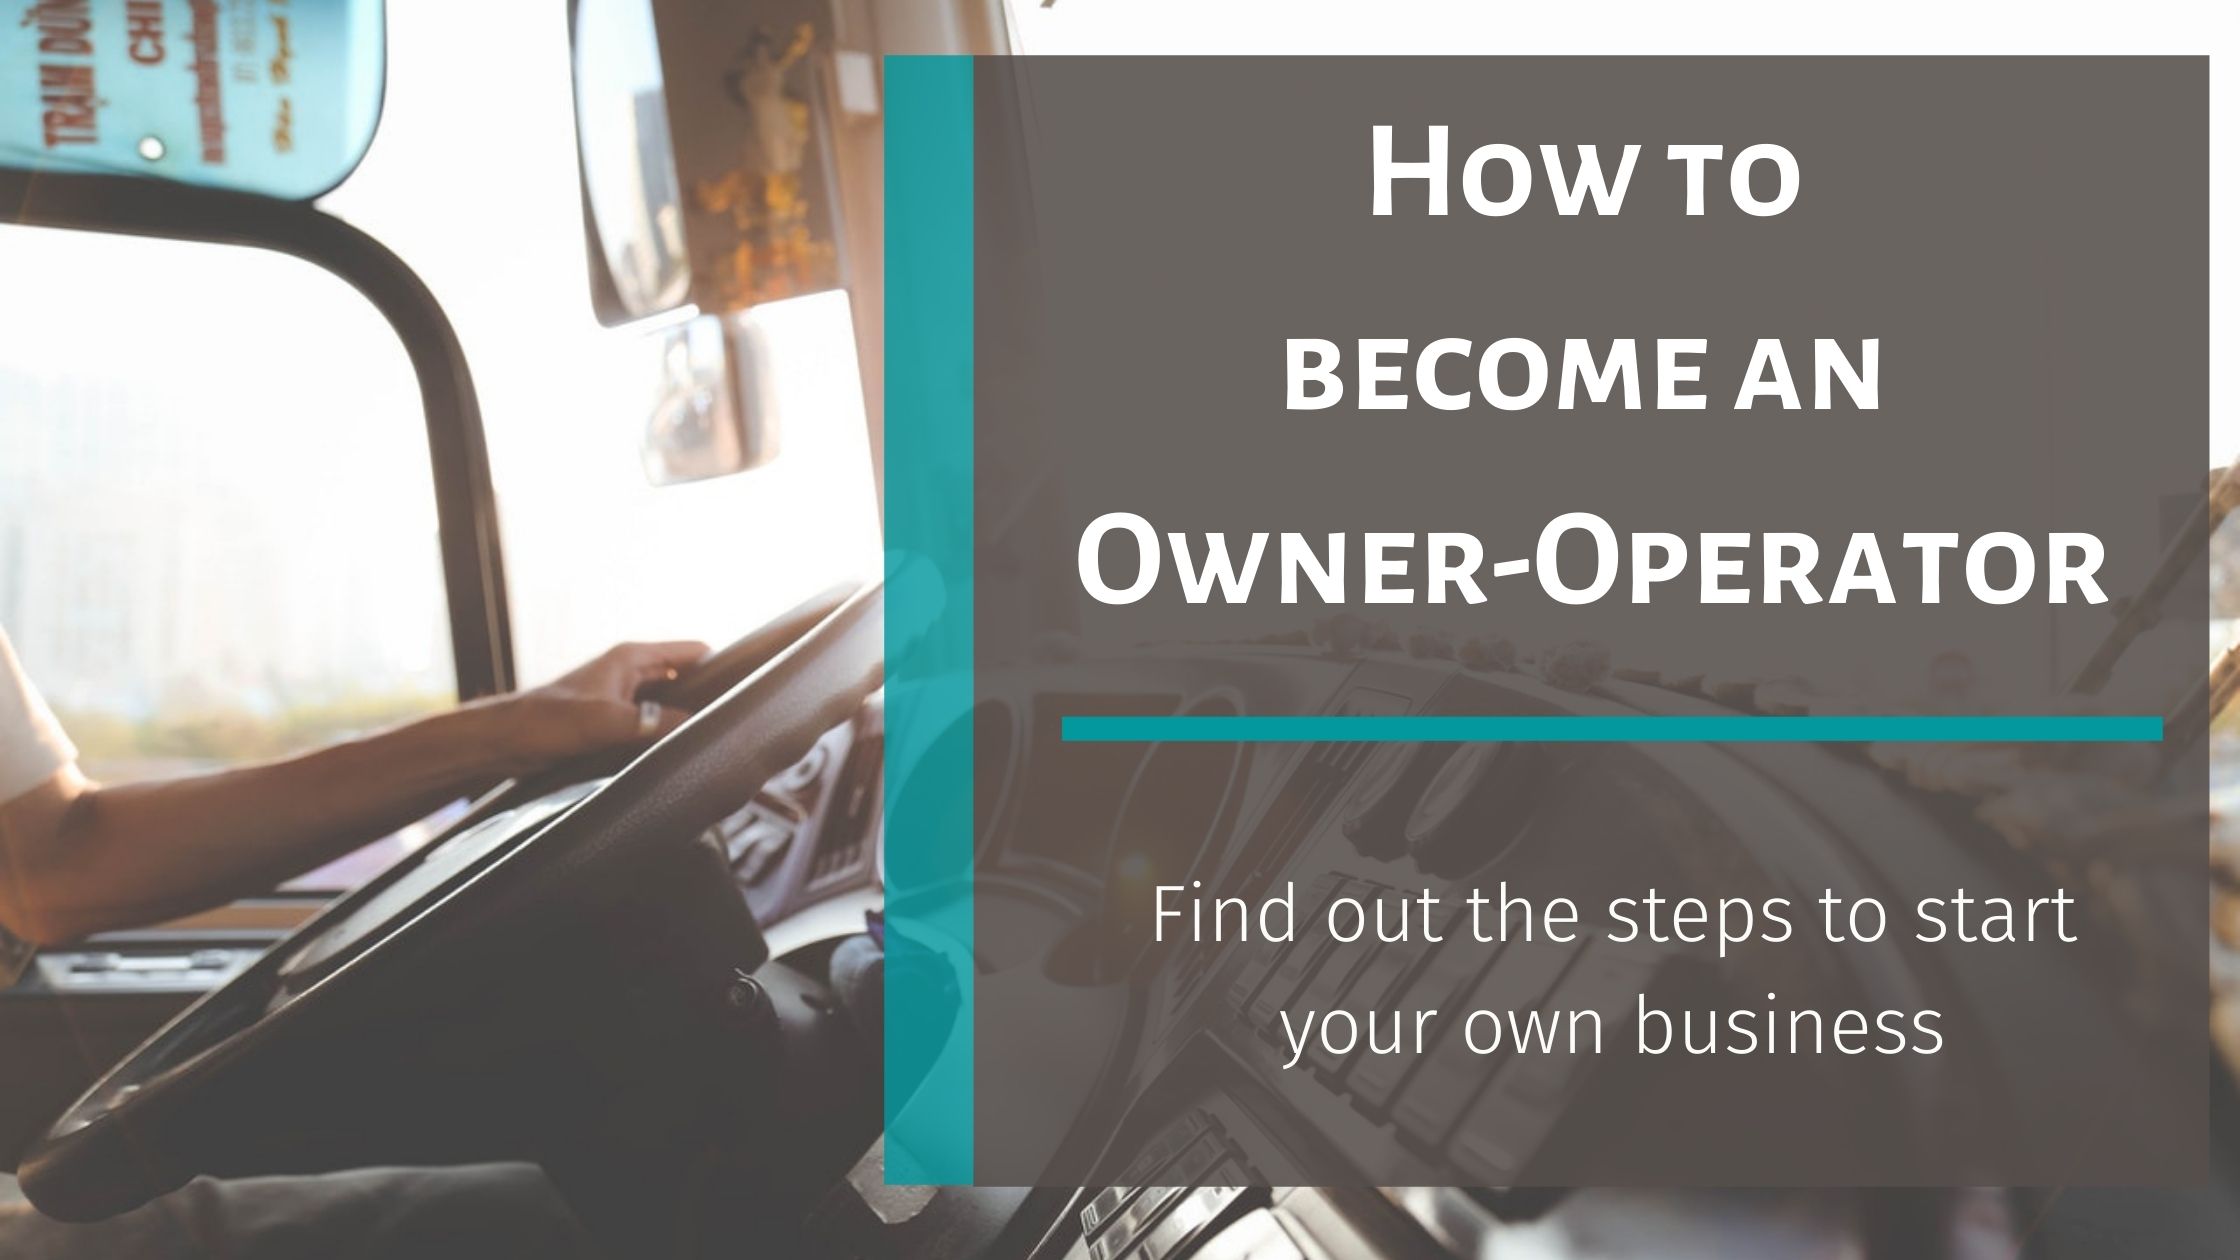 How to become an Owner-Operator